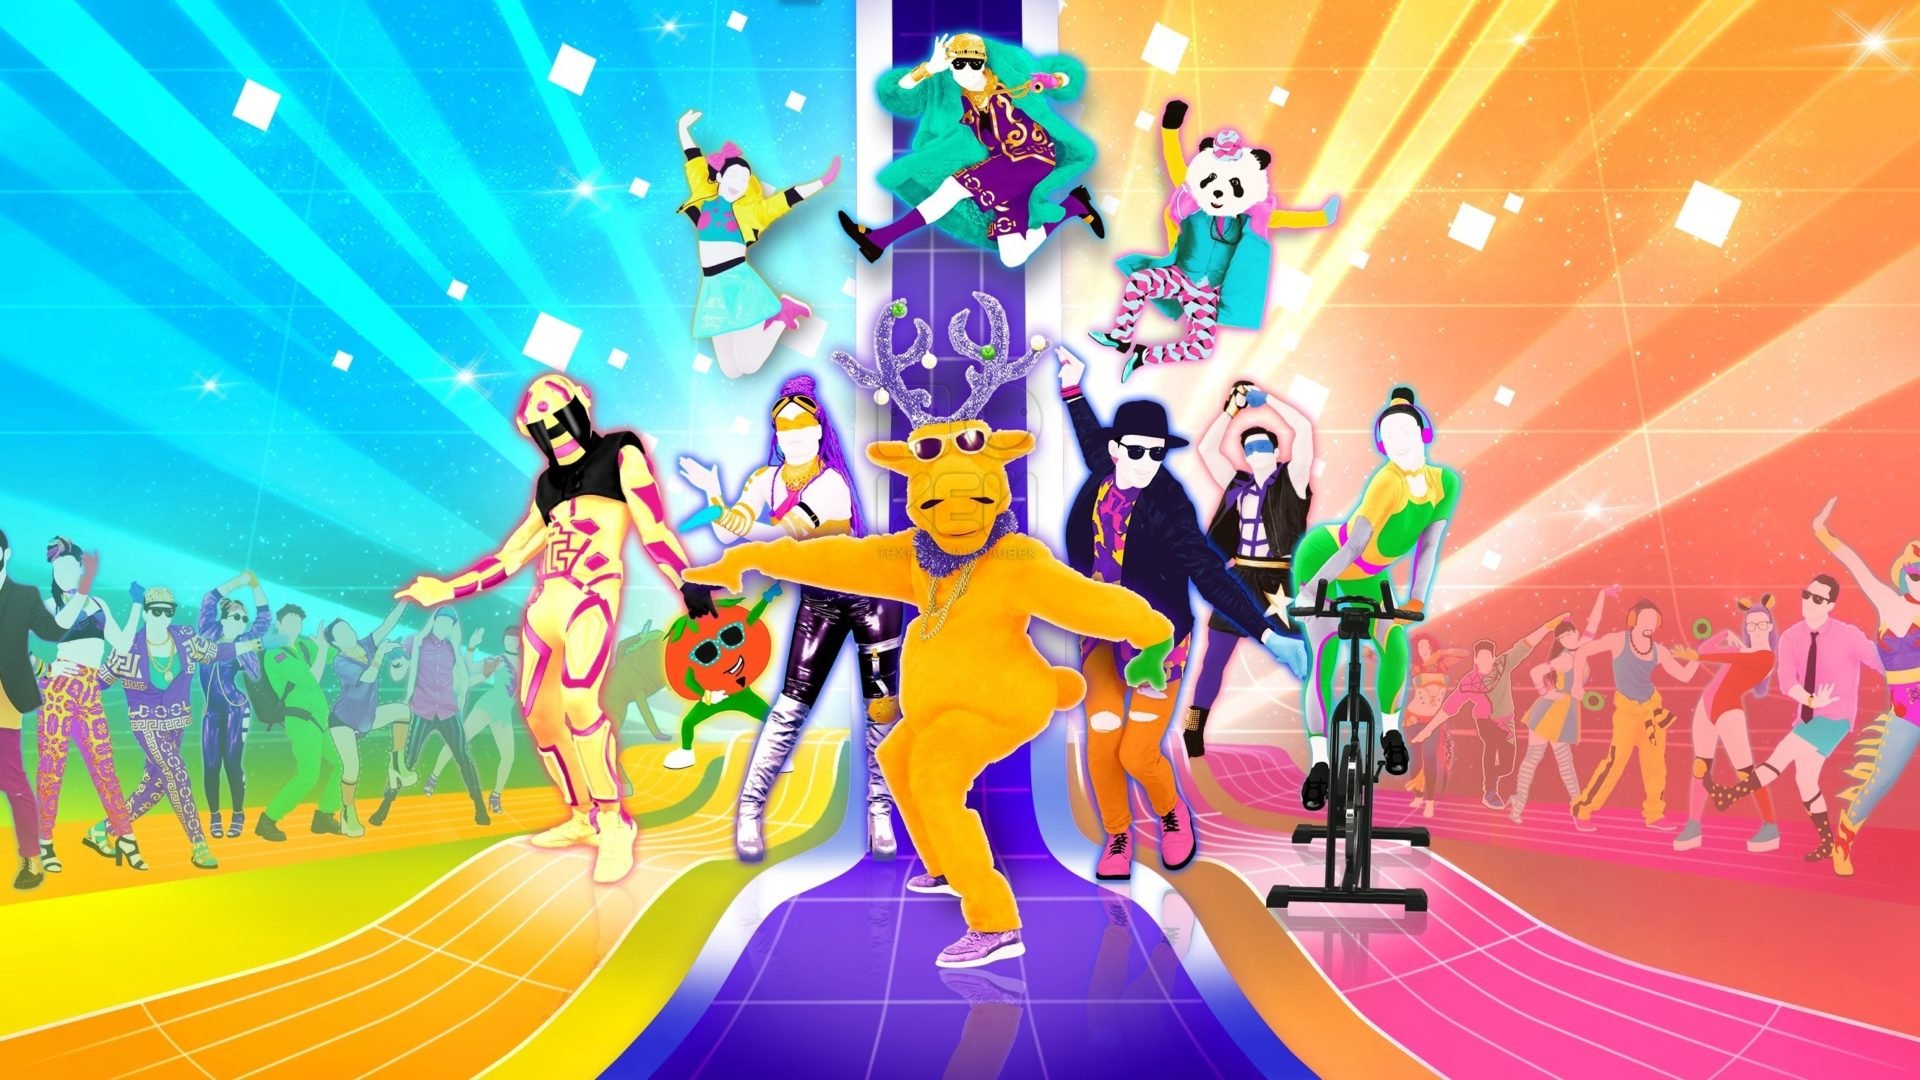 This is just a game. Джаз дэнс 2018. Just Dance (игра). Джаст дэнс танцы. Just Dance Мексика.